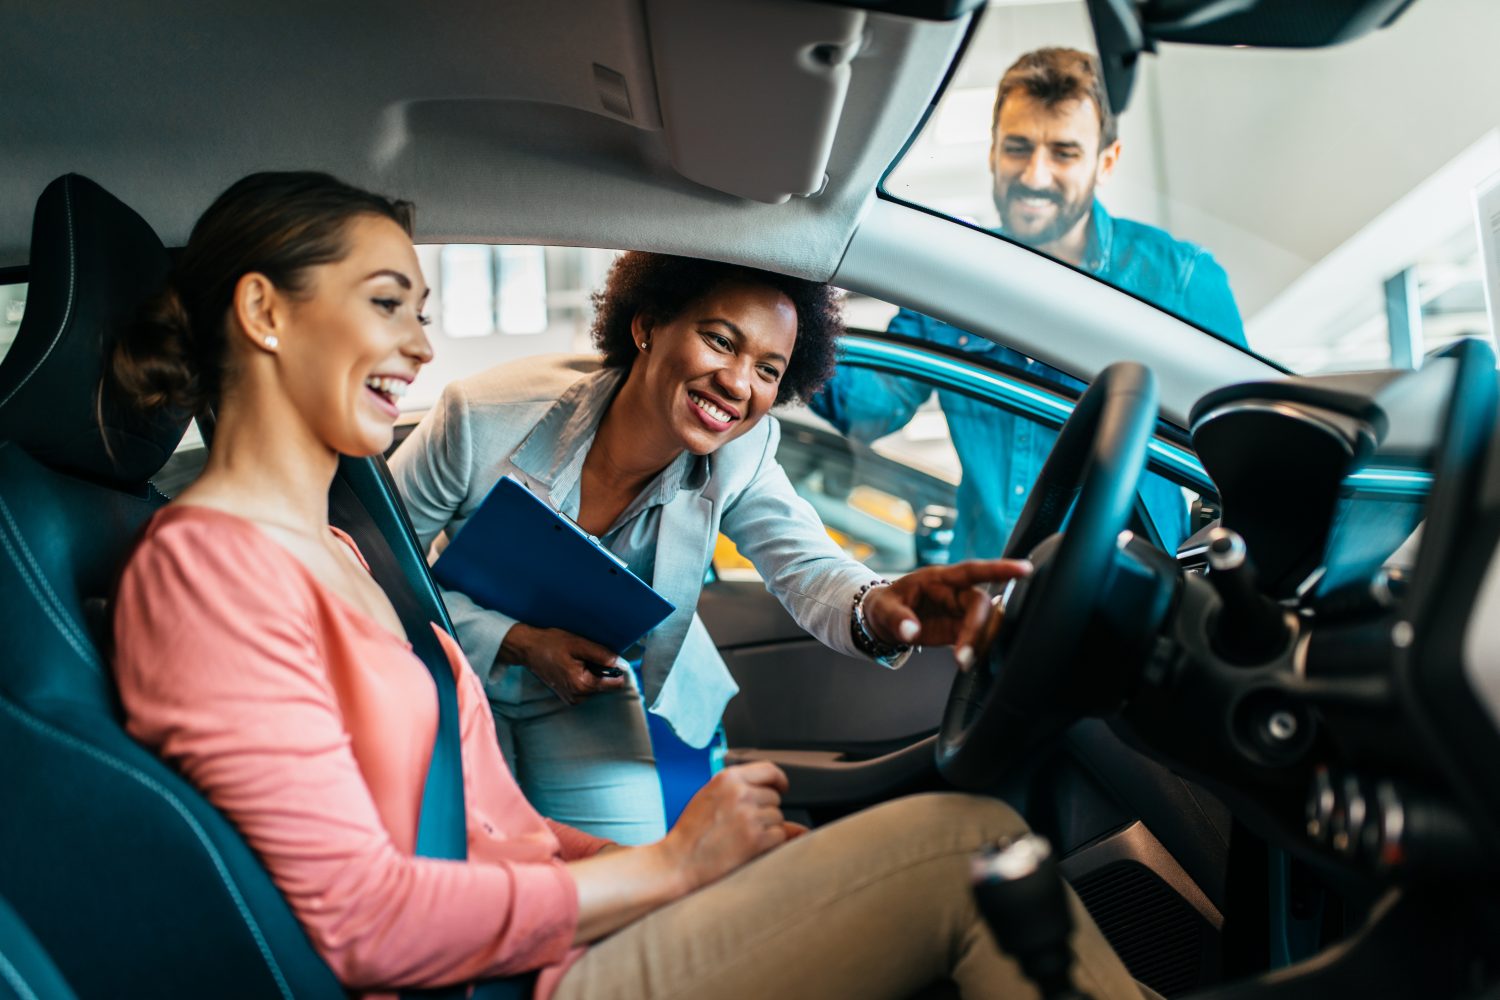 A seismic shift in automotive sales: high-income buyers dominate the market, Gen Z prefers cash, reshaping dealership strategies.